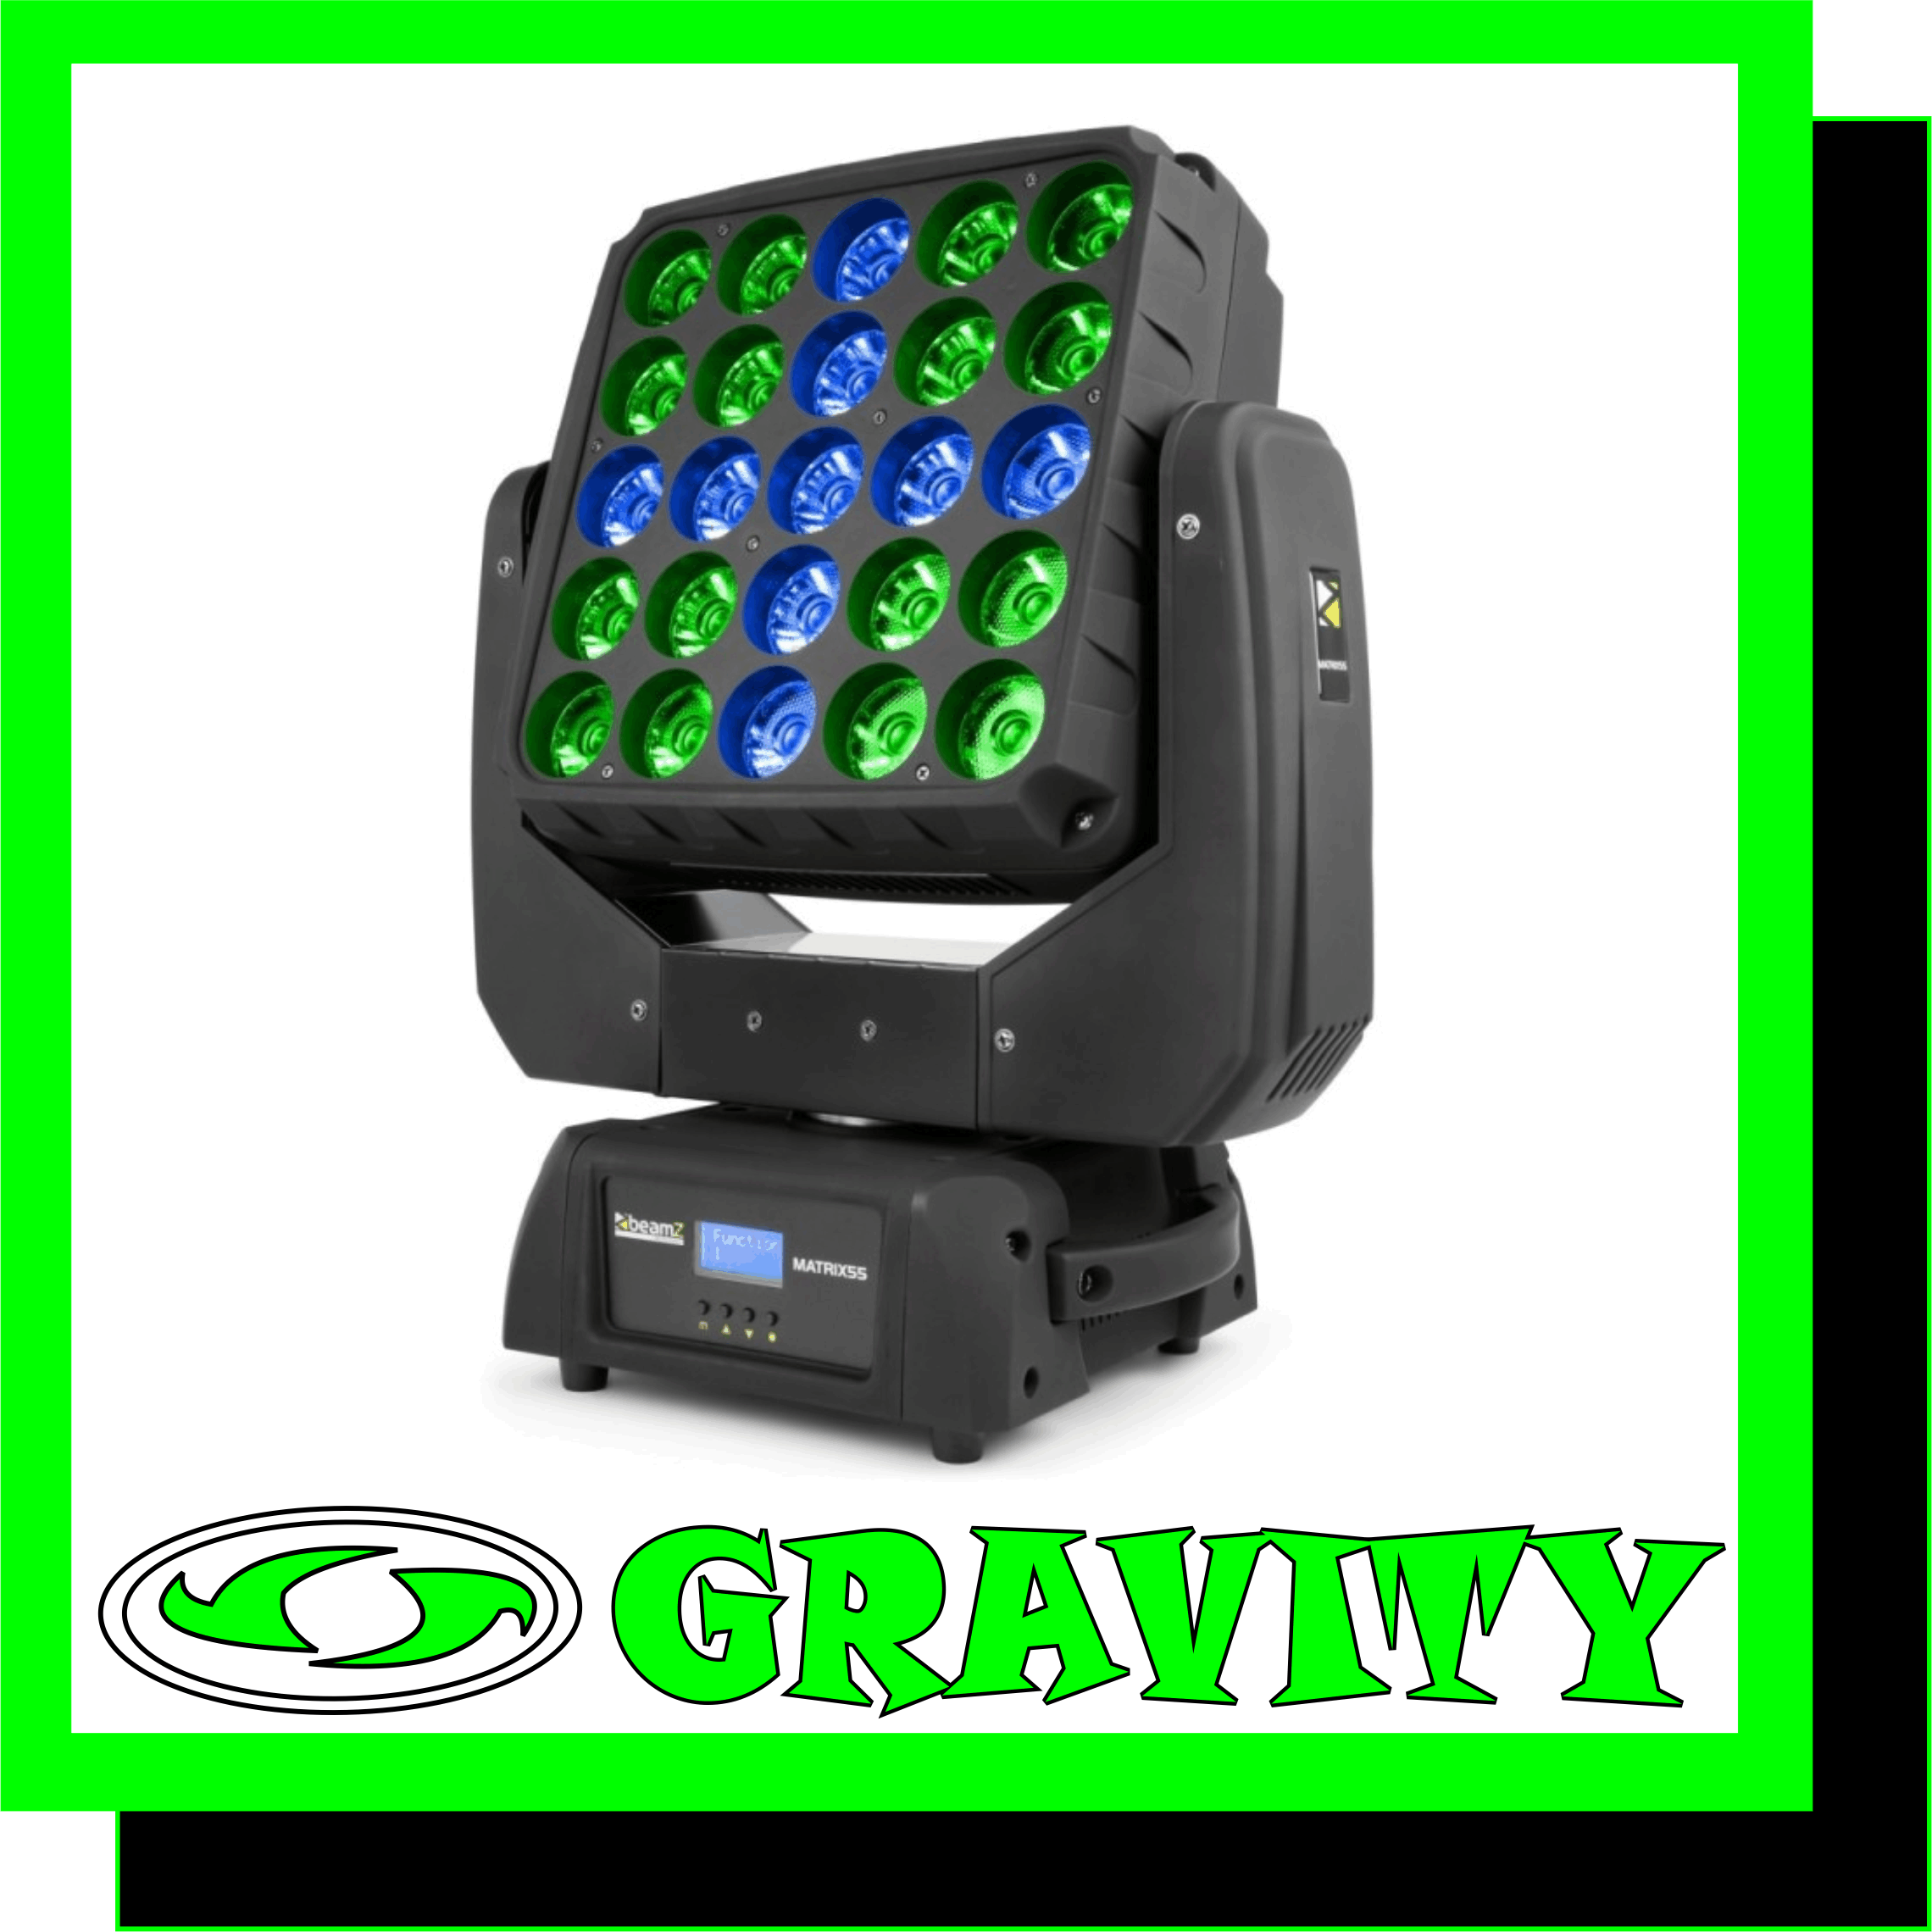 BEAMZ MATRIX55 QUAD MOVING HEAD 2PC IN FLIGHTCASE  Comes with a 15° beam angle, 8 and 13-Channel DMX mode, colour strobe, electronic dimmer etc. Smooth but extremely fast 540° Pan and 180° Tilt movements  Features:  Multi colours 7x 10W Quad LED’s 8 and 13-Channel DMX mode Strobe and dimmer 0-100% Sound activated via a built-in microphone Auto / Master &: Slave synchronization Pan/Tilt 540° / 180° 15° beam angle Head MovementPan:540° Head MovementTilt:180° Beam Angle:15° No Of LEDs:7x 10W Quad DMX Channels:8 or 13 Connector:3-pin XLR Power Supply:220-240Vac/50Hz Consumption:80W SOFT CASE  Newly designed padded soft cases to protect and extend the life of mobile lighting fixtures. It’s wide opening allows for a variety of fixtures to fit inside and gear to be removed quickly and easily. It fits other products and accessories as well. Suitable for mobile DJs, Karaoke rigs and working bands.  Features:  Quality protection for mobile lighting fixtures For storing extra Lamps, Clamps, Cables and other Accessories Saves valuable transport space by allowing fixtures to be stacked without having to be boxed Secure view windows make it easy to identify specific fixtures even after they have been pack